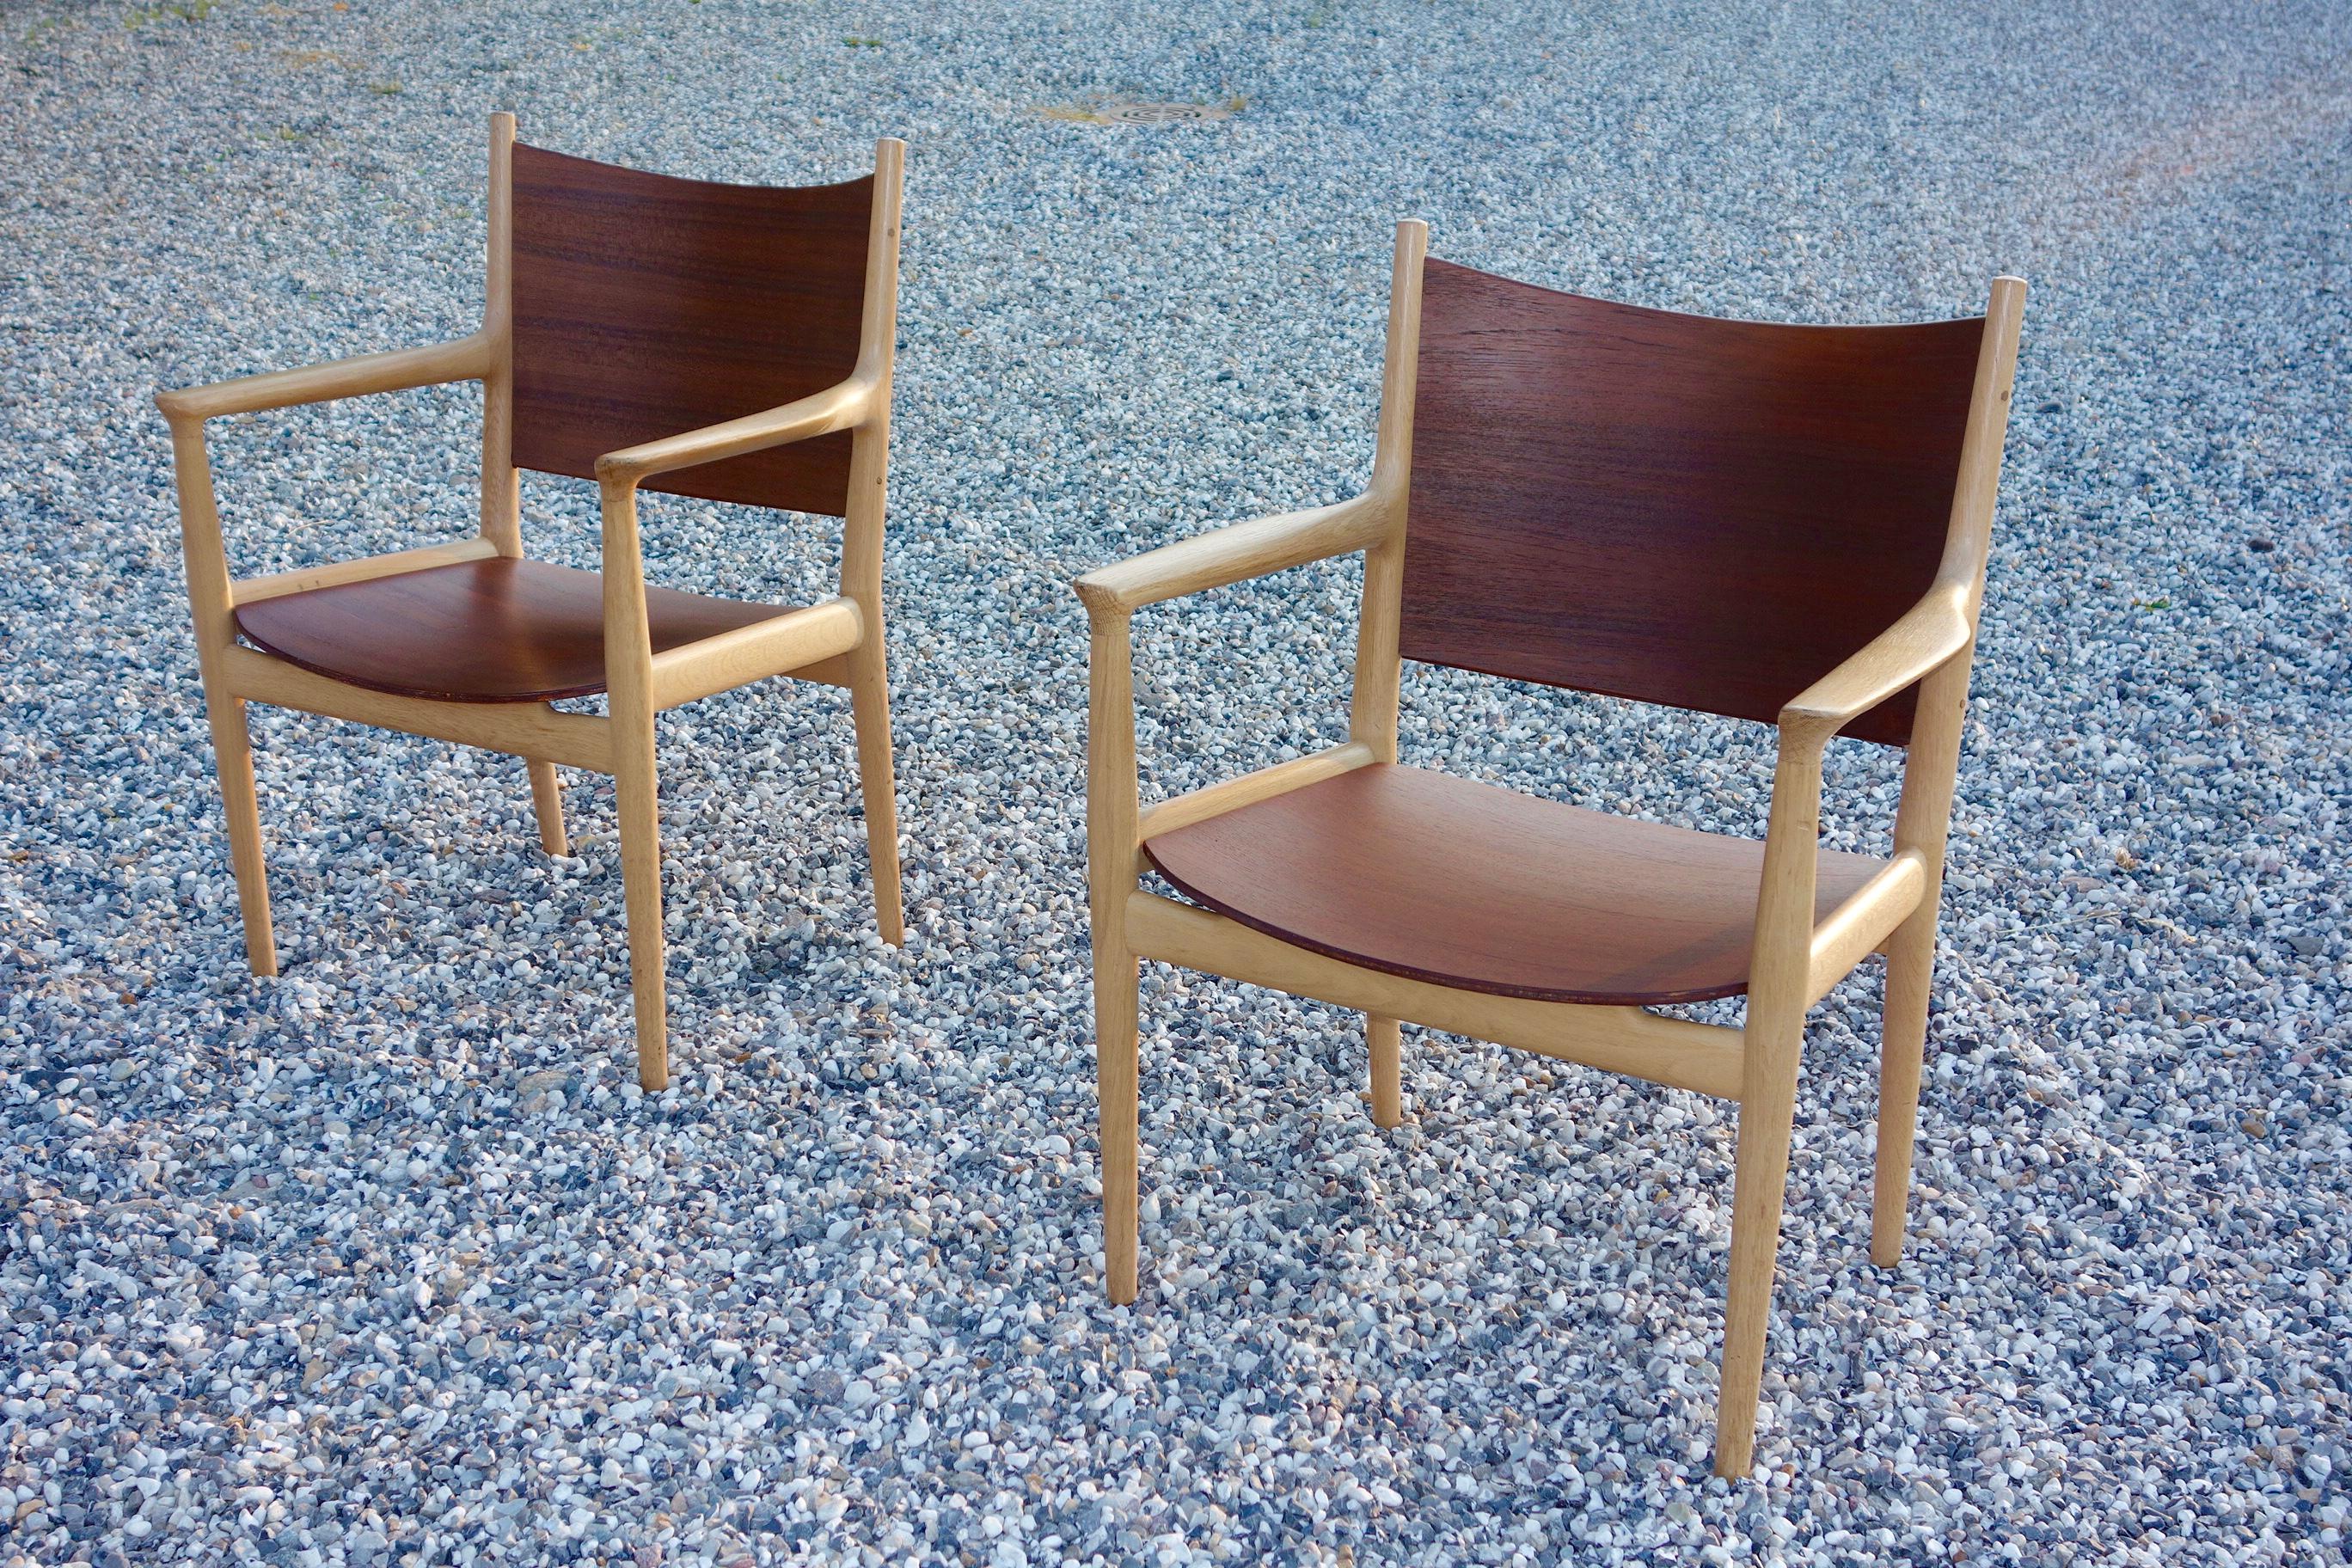 Hans J. Wegner. Pair lounge chairs in solid oak, seat and back in veneered teak. Produced and labelled by Johannes Hansen, model JH 513. Designed 1962. Teak veneer on seat and back. Measures: H. 90/41 cm., W. 68 cm., D. 60 cm. Sold also individually